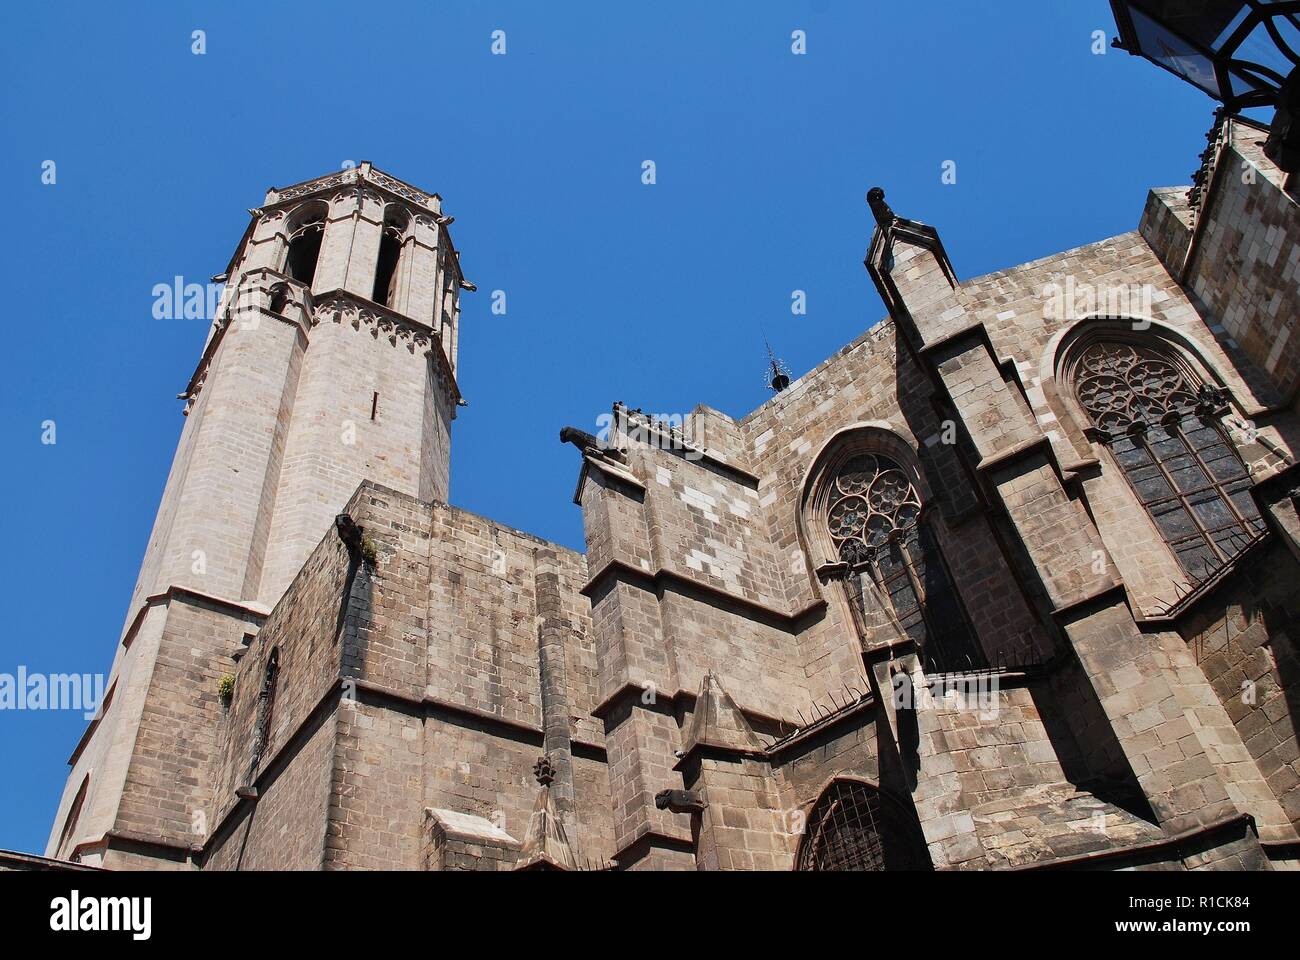 The Cathedral of the Holy Cross and Saint Eulalia in the Gothic Quarter of Barcelona, Spain. Construction of the main building began in 1298. Stock Photo